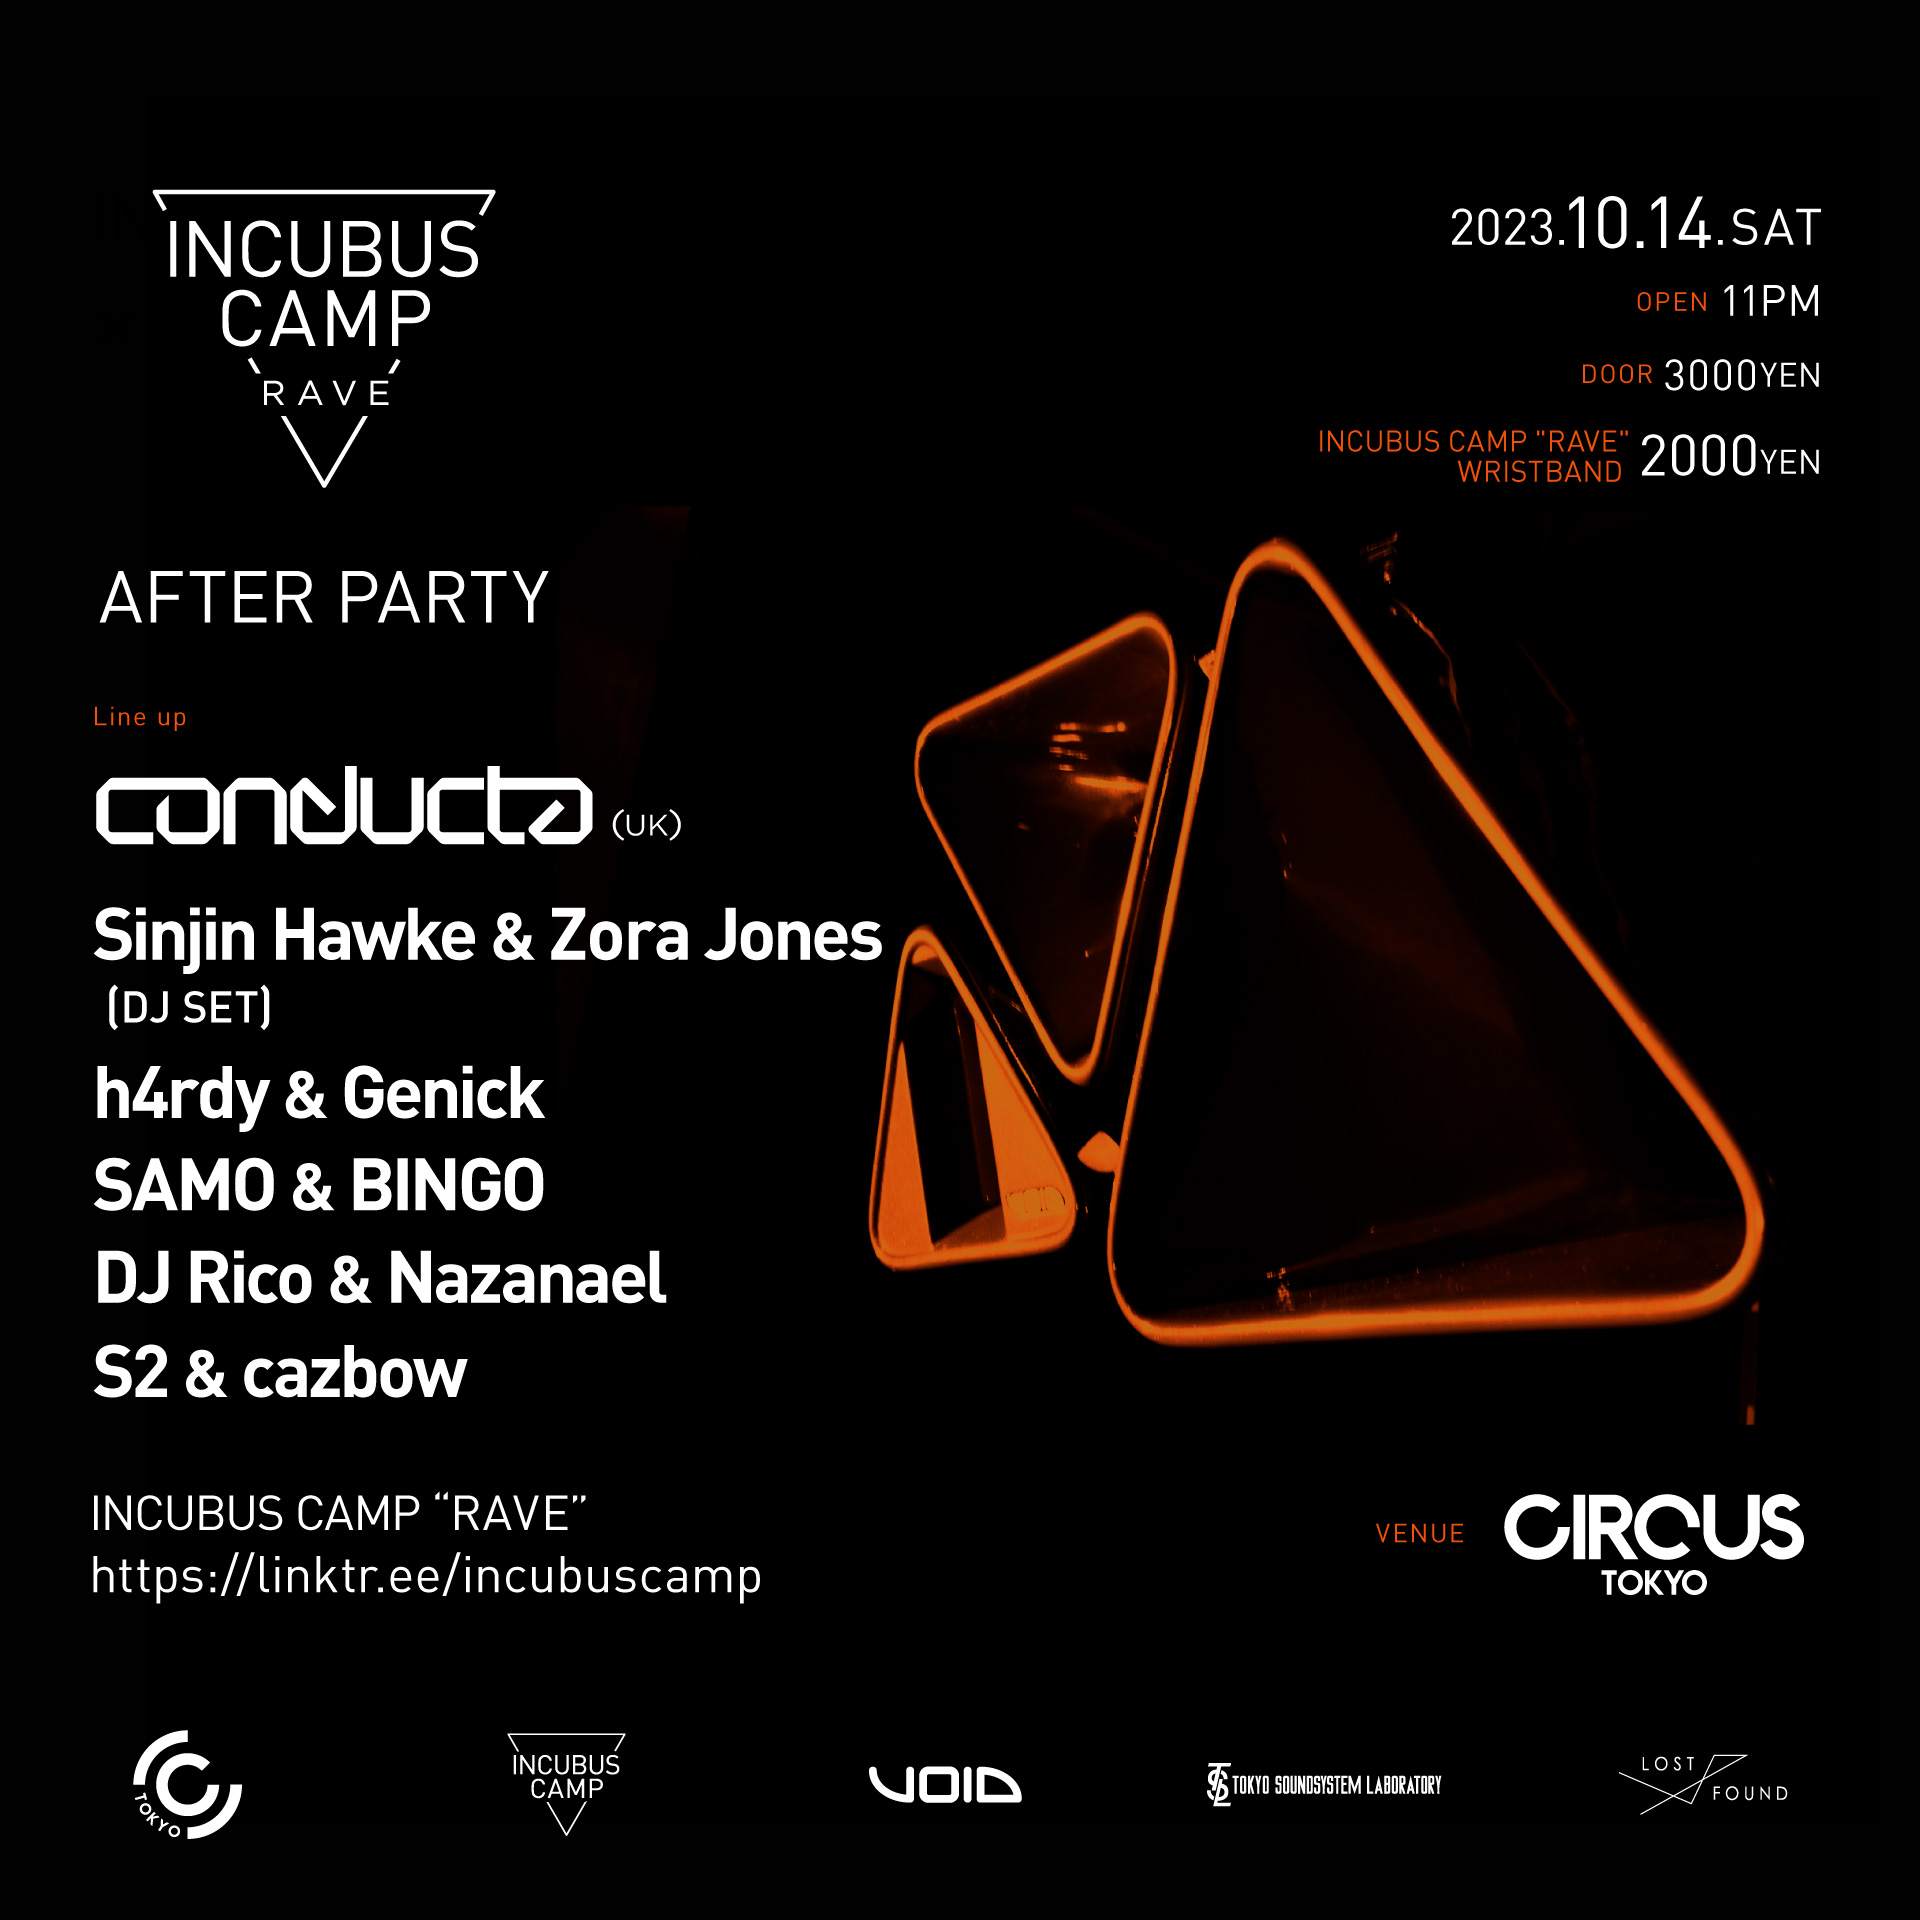 INCUBAS CAMP RAVE AFTER PARTY - フライヤー表